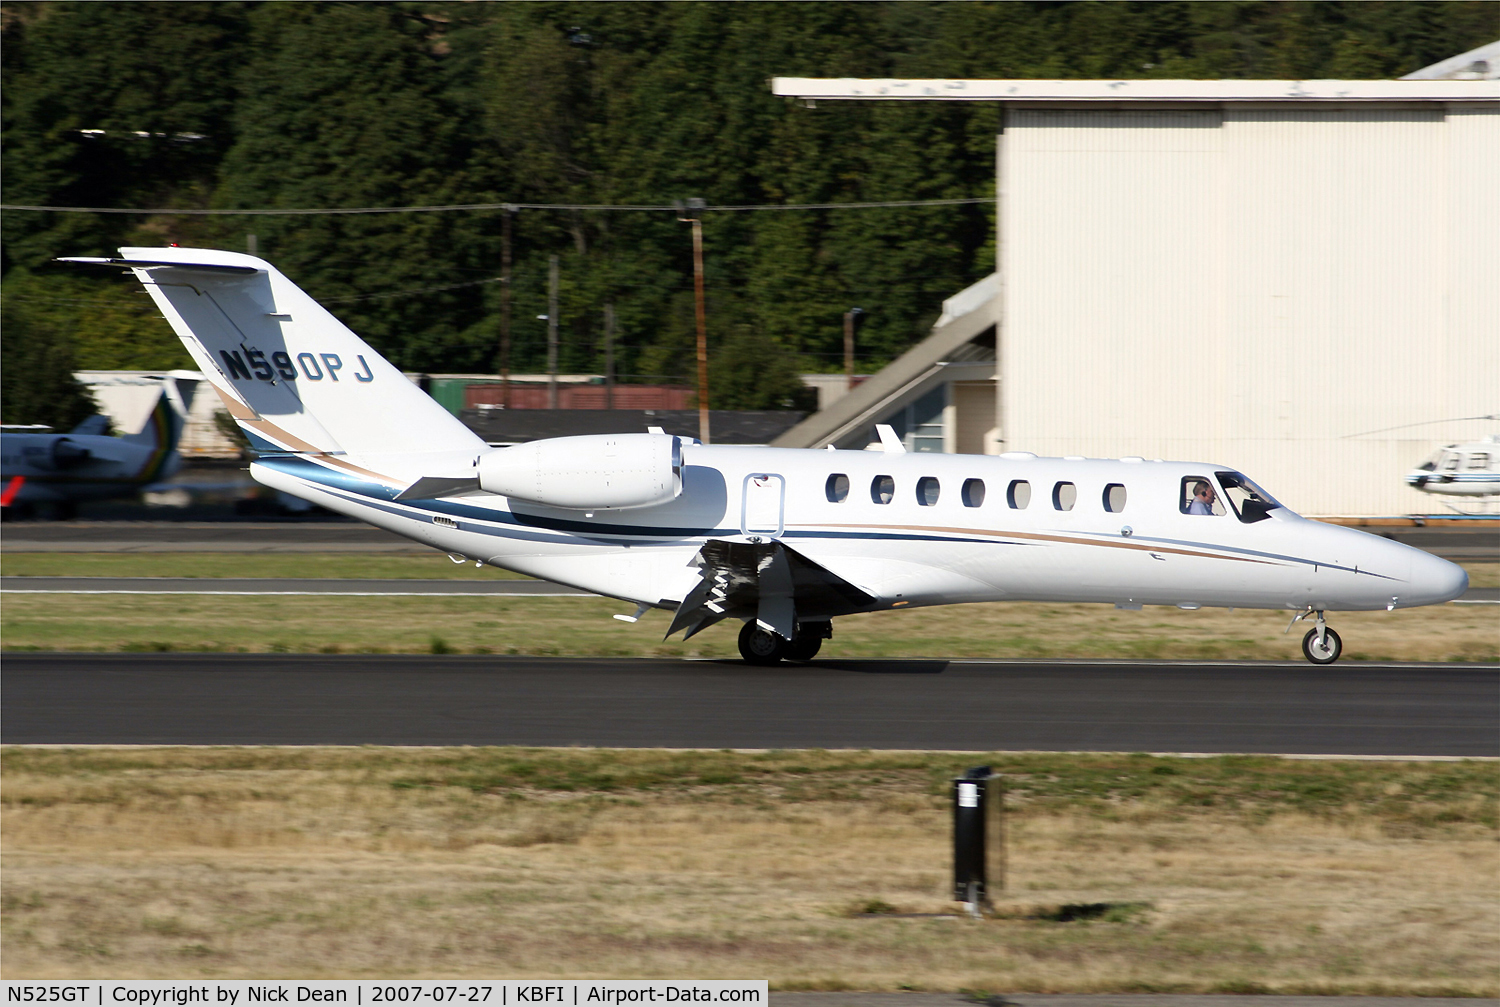 N525GT, 2006 Cessna 525B CitationJet CJ3 C/N 525B0104, KBFI (Seen here as N590PJ and currently registered N525GT as posted)